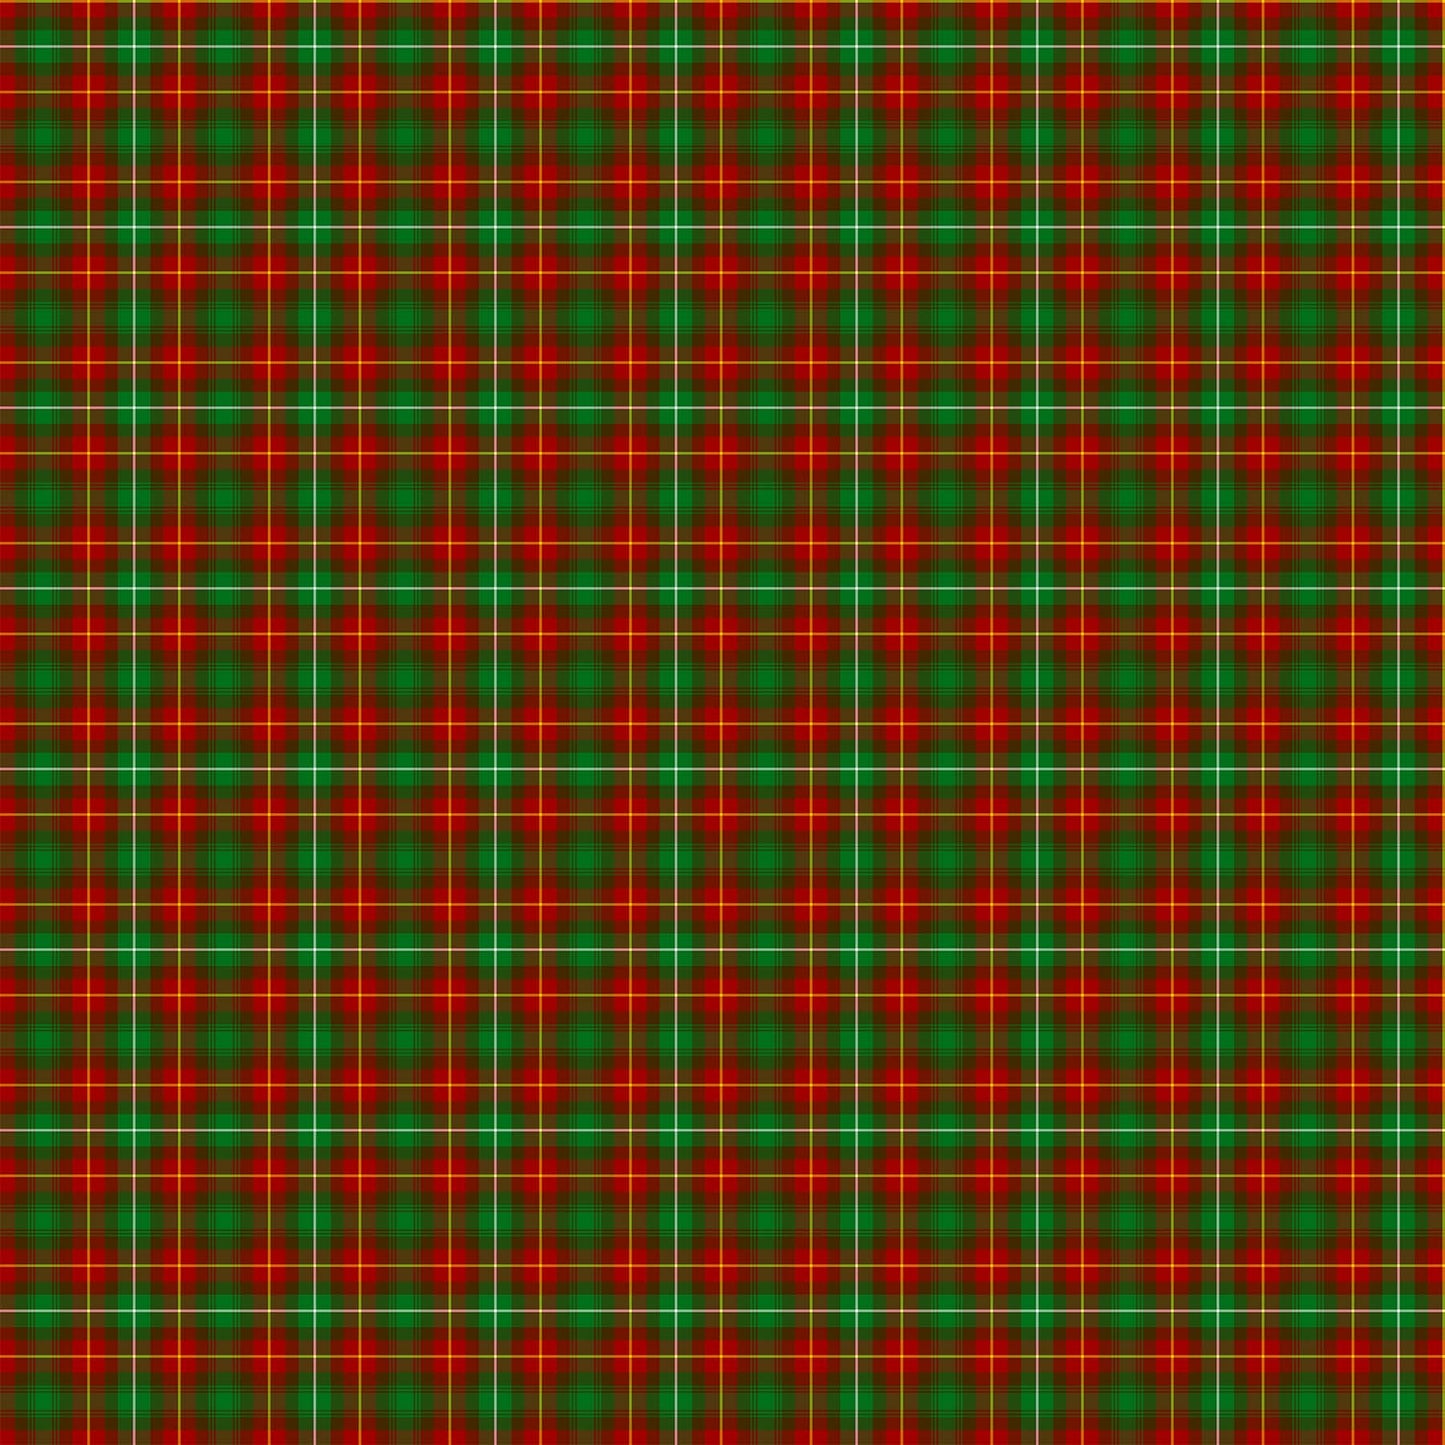 Tartan Traditions Pei Green Multi W25581-74 by Northcott Fabrics (Sold in 25cm increments)